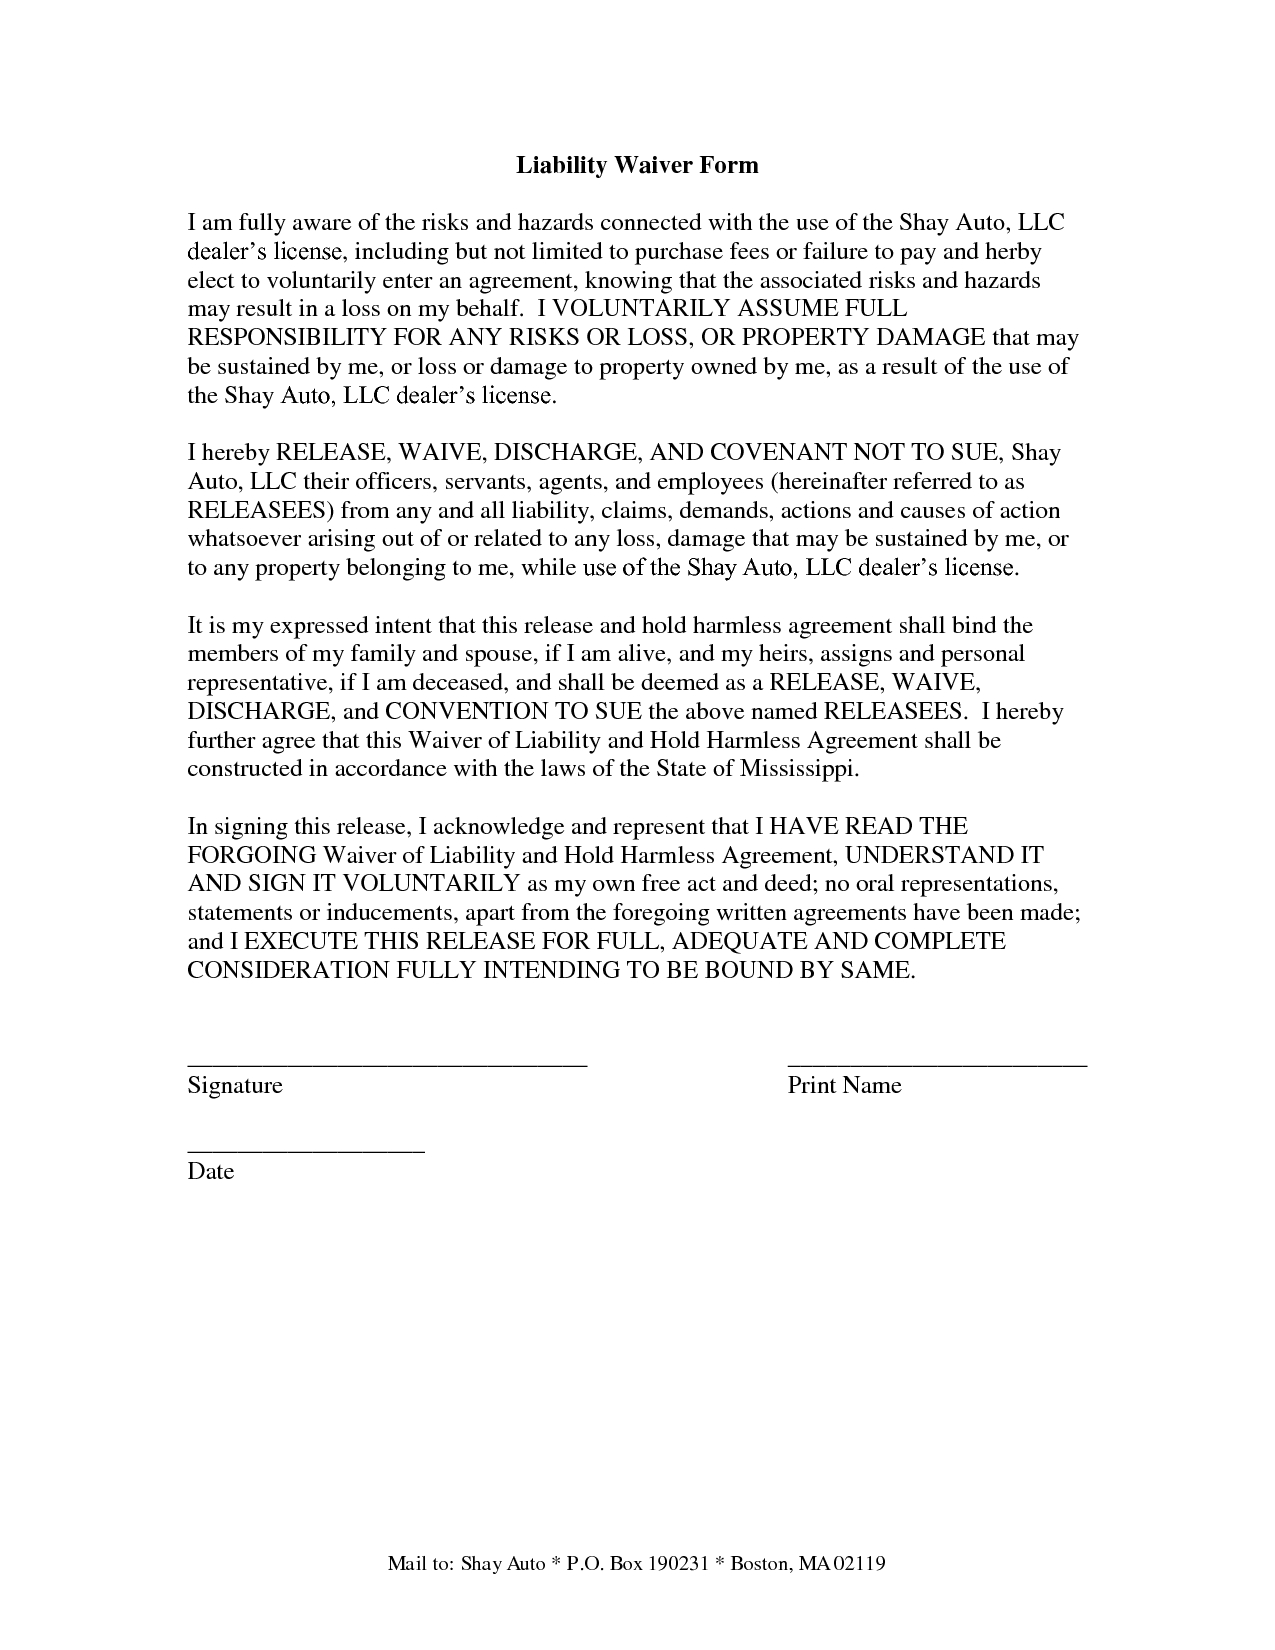 Liability Release Agreement 010 Template Ideas Waiver Of Liability Release Form 12312 Astounding